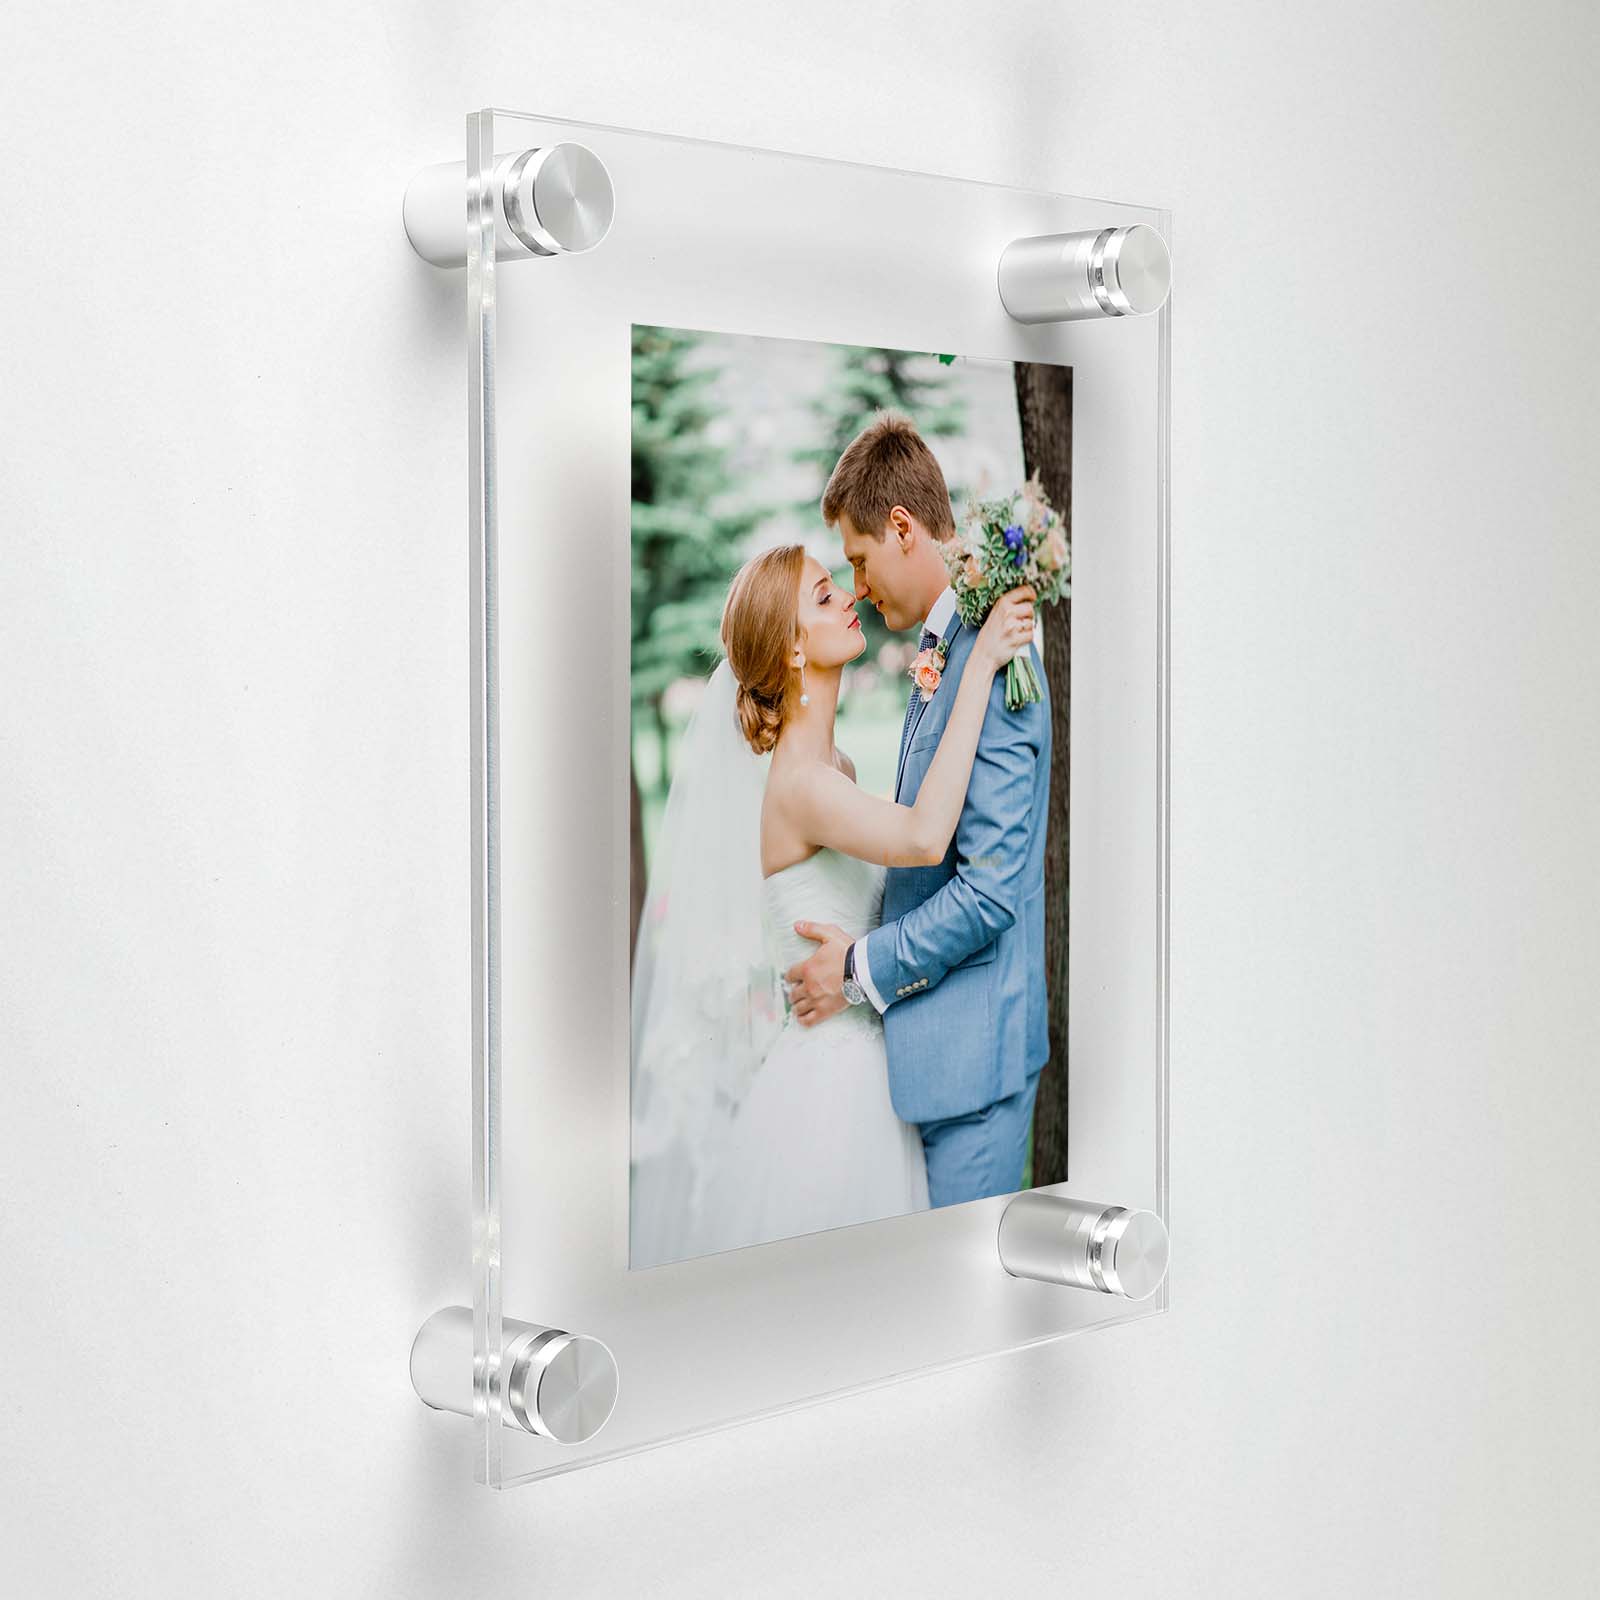 (2) 19-3/4'' x 26'' Clear Acrylics , Pre-Drilled With Polished Edges (Thick 3/16'' each), Wall Frame with (4) 5/8'' x 1'' Silver Anodized Aluminum Standoffs includes Screws and Anchors